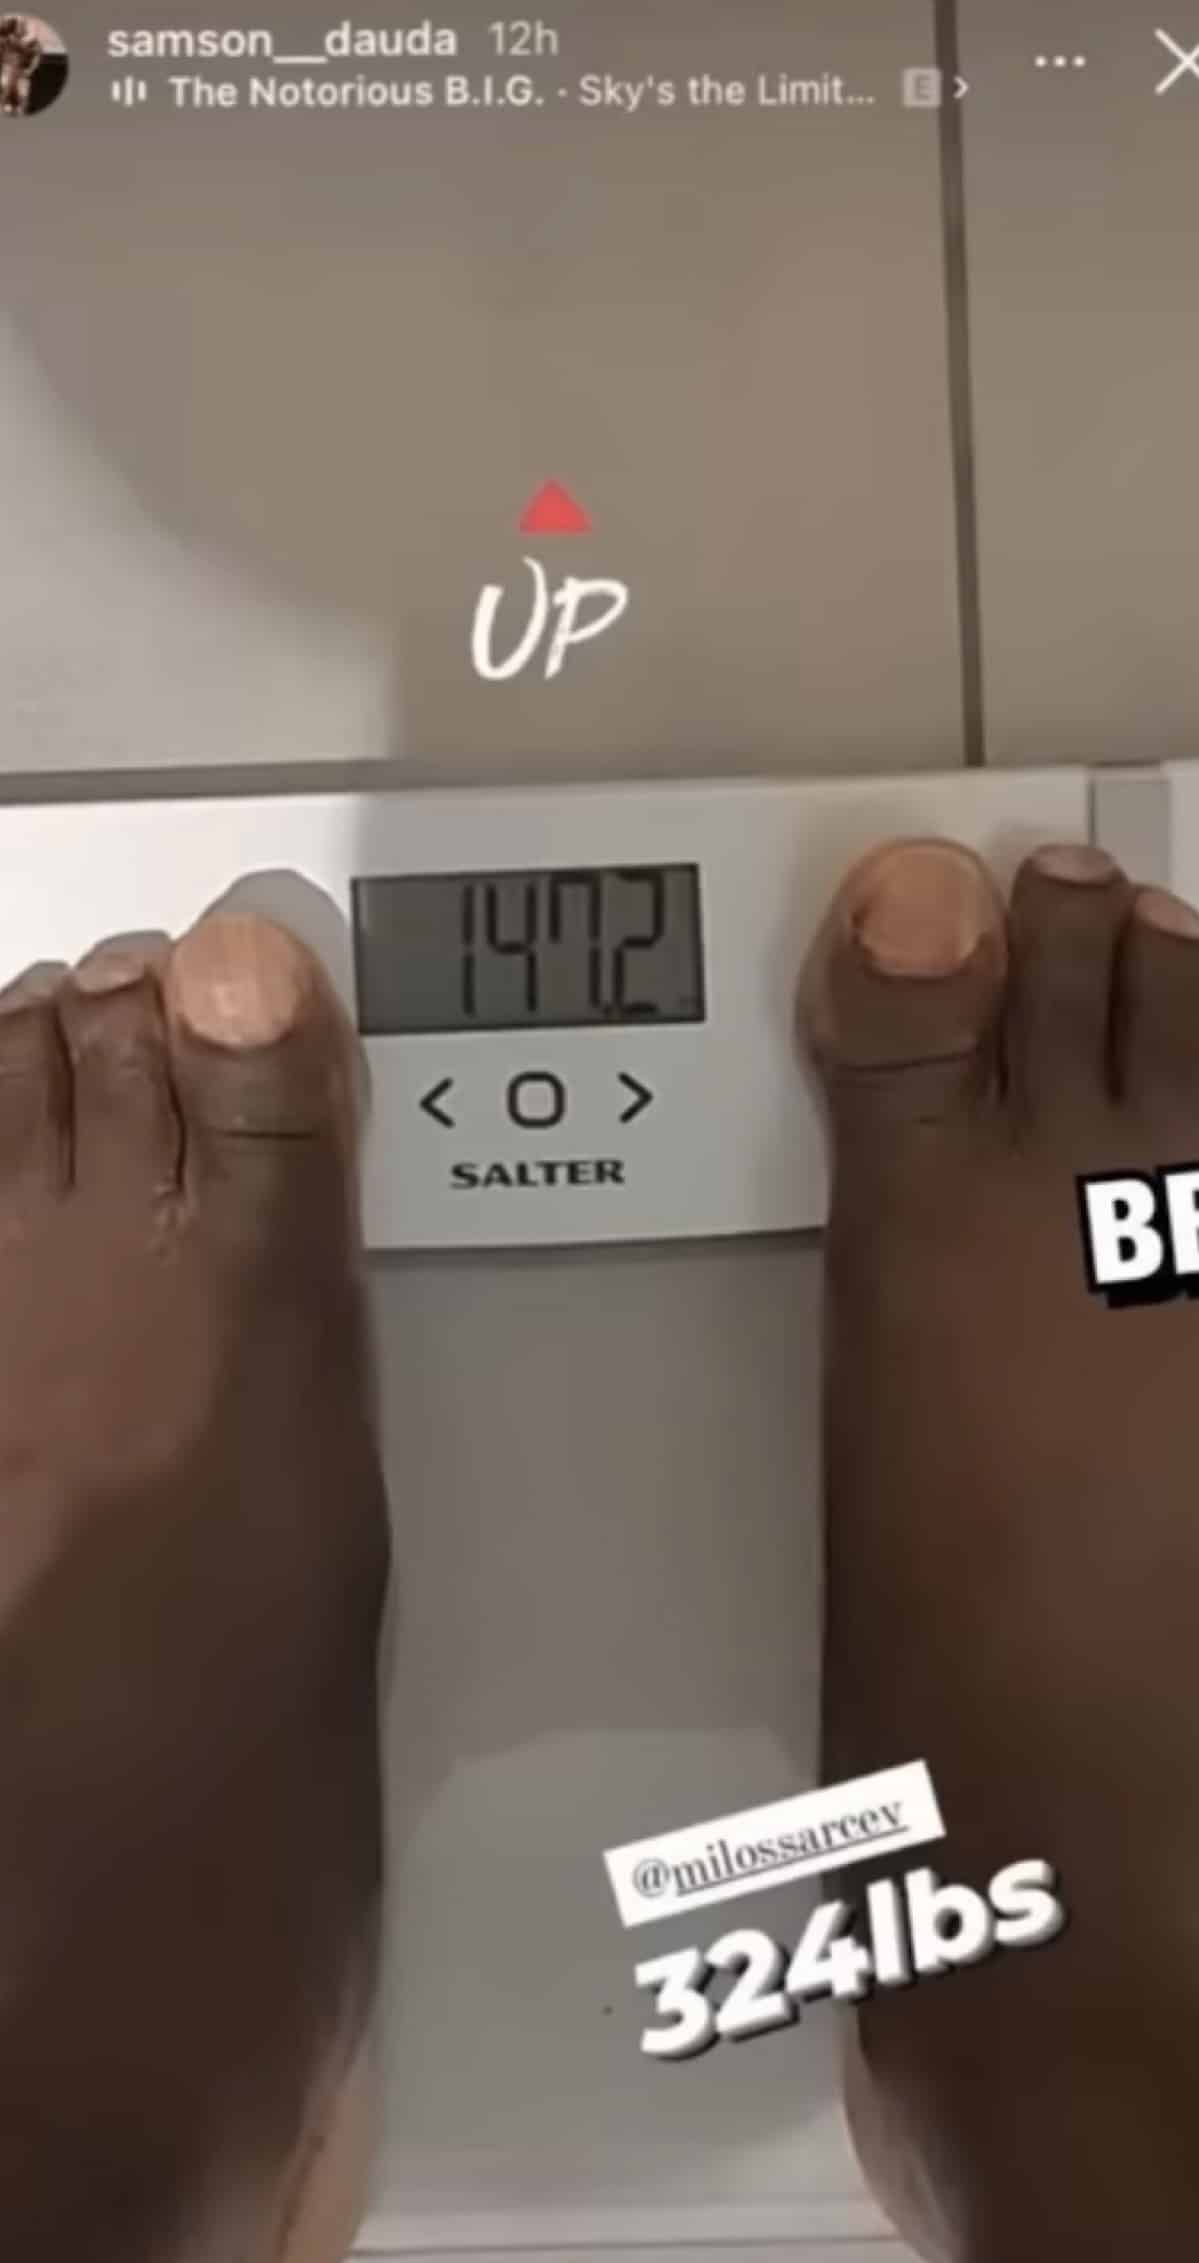 Samson Dauda is Tipping the Scales at an Insane 324Lbs!